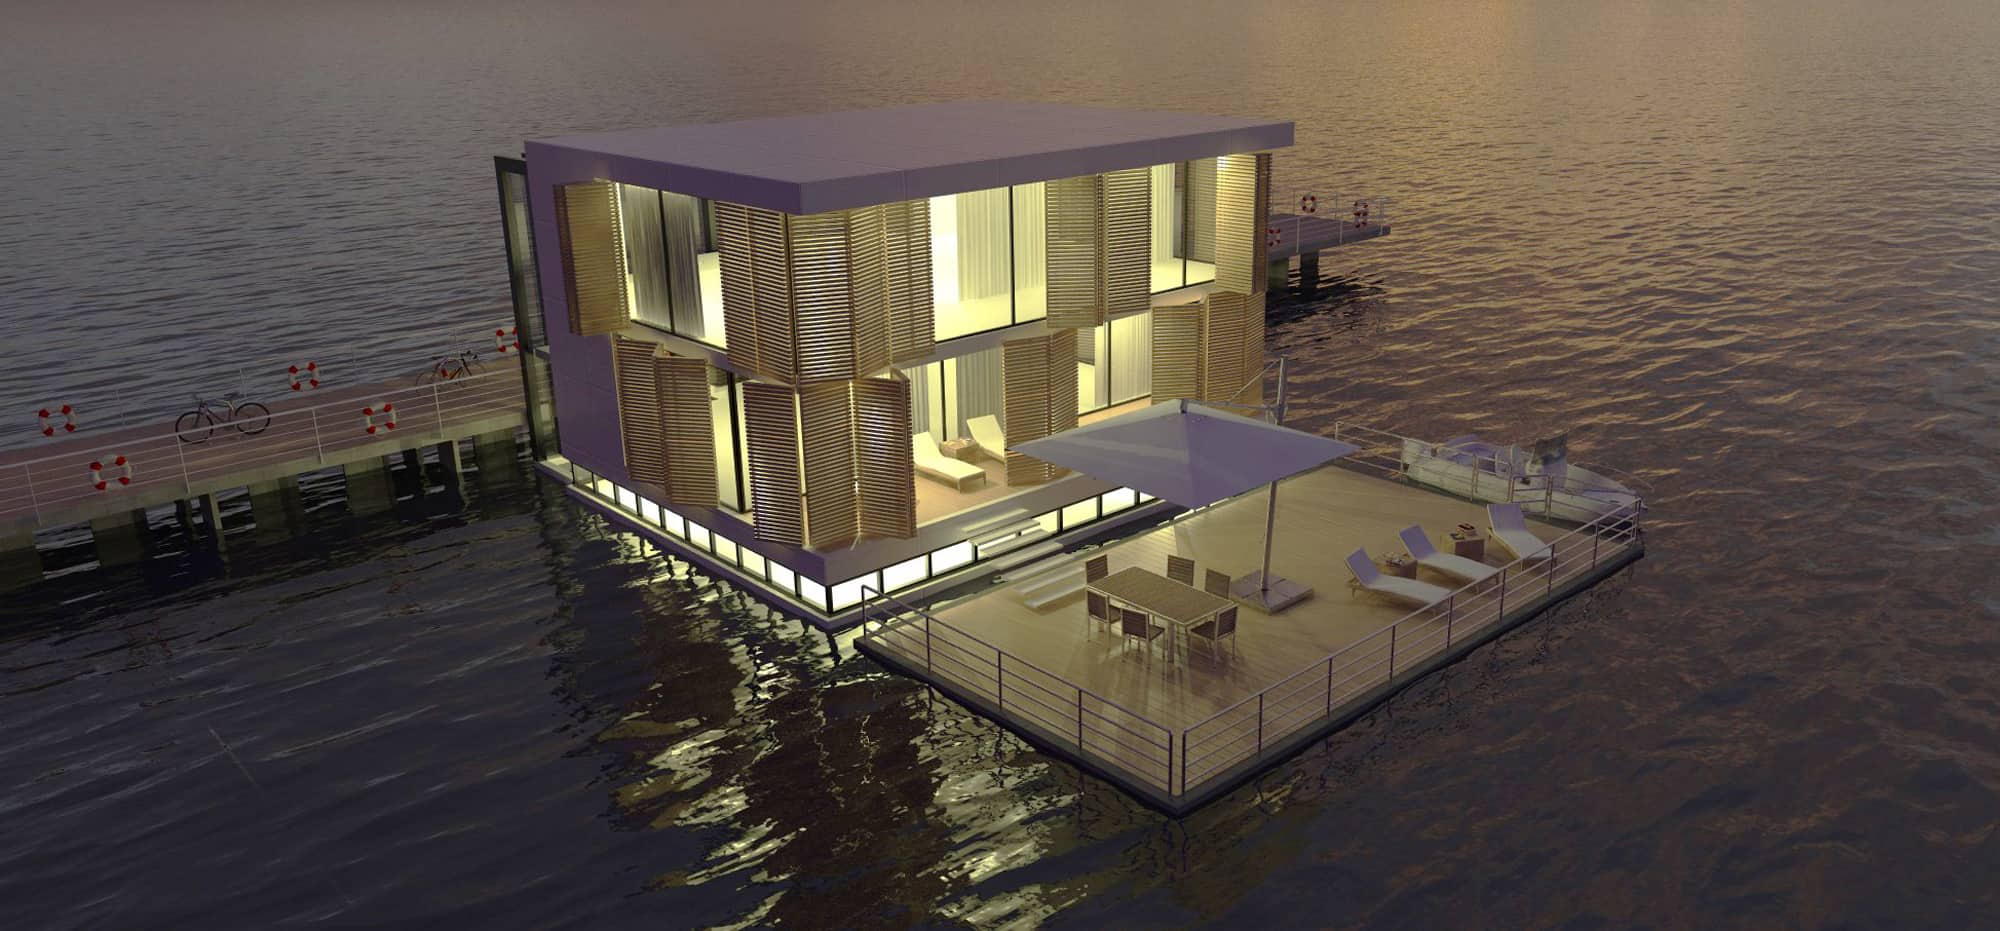 South_Developers_Floating_House_NY_3